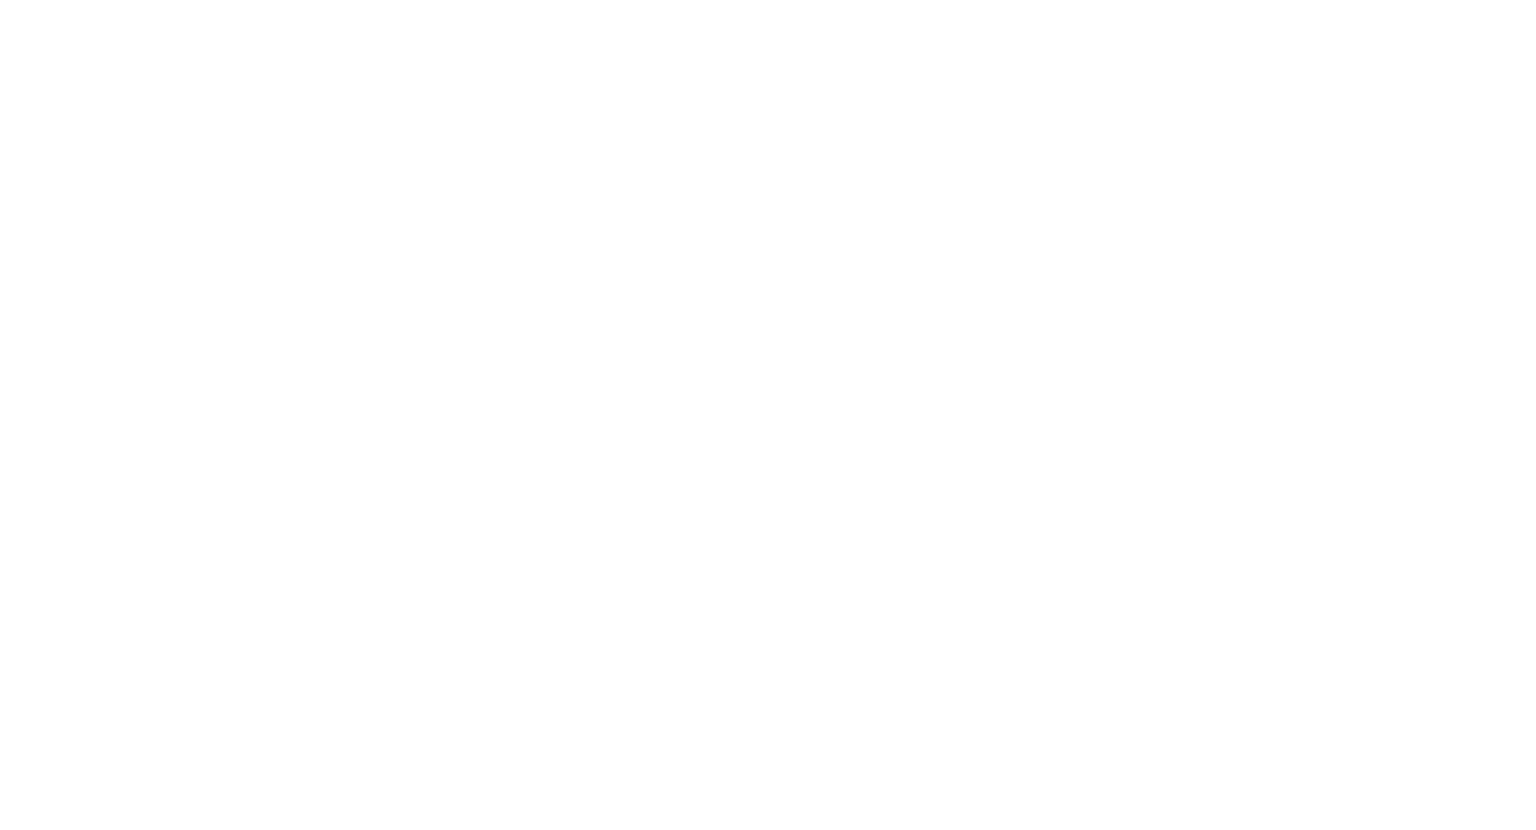 2001: A Space Odyssey and Silent Running